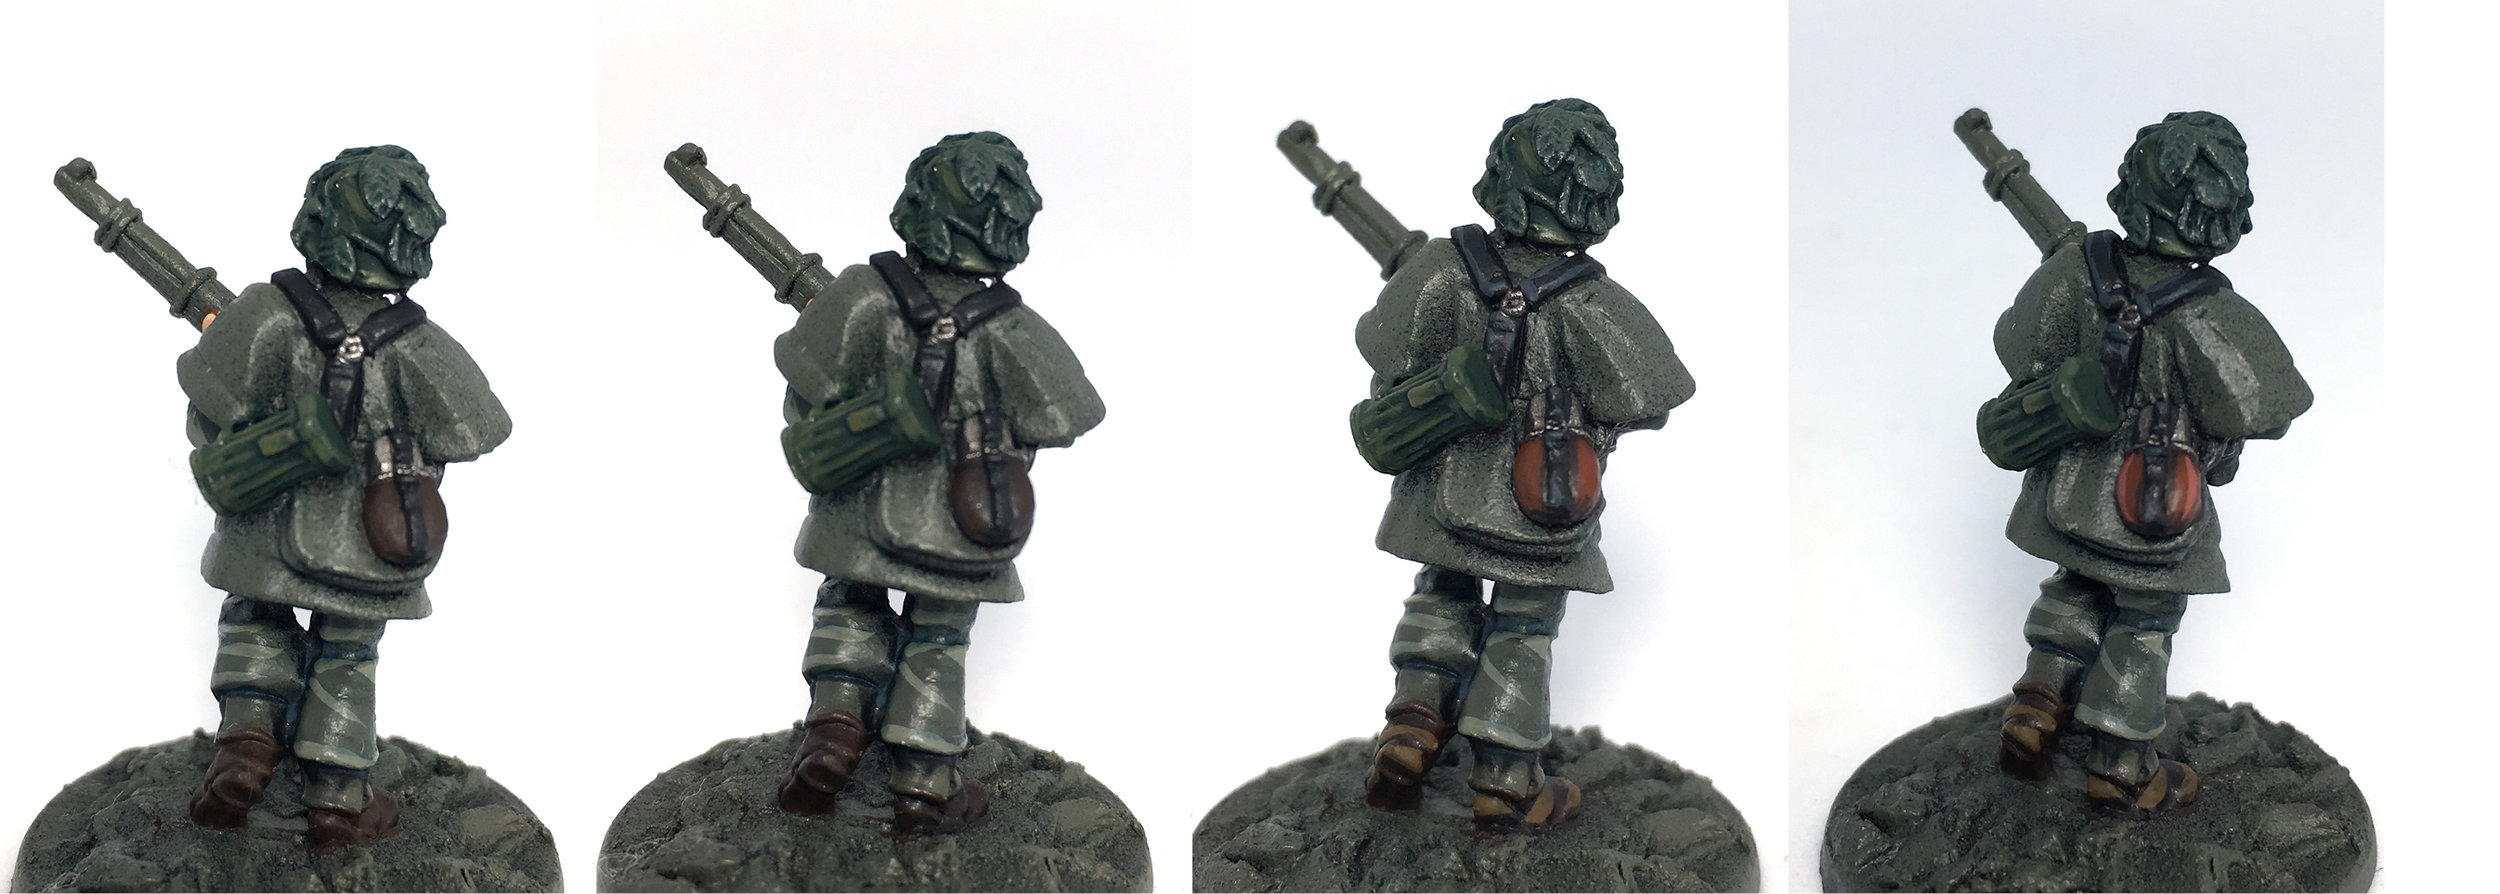 PAINTING WAR SENT 1ST CLASS VOLUME 1 GERMAN ARMY WW2 MINIATURES GUIDE 